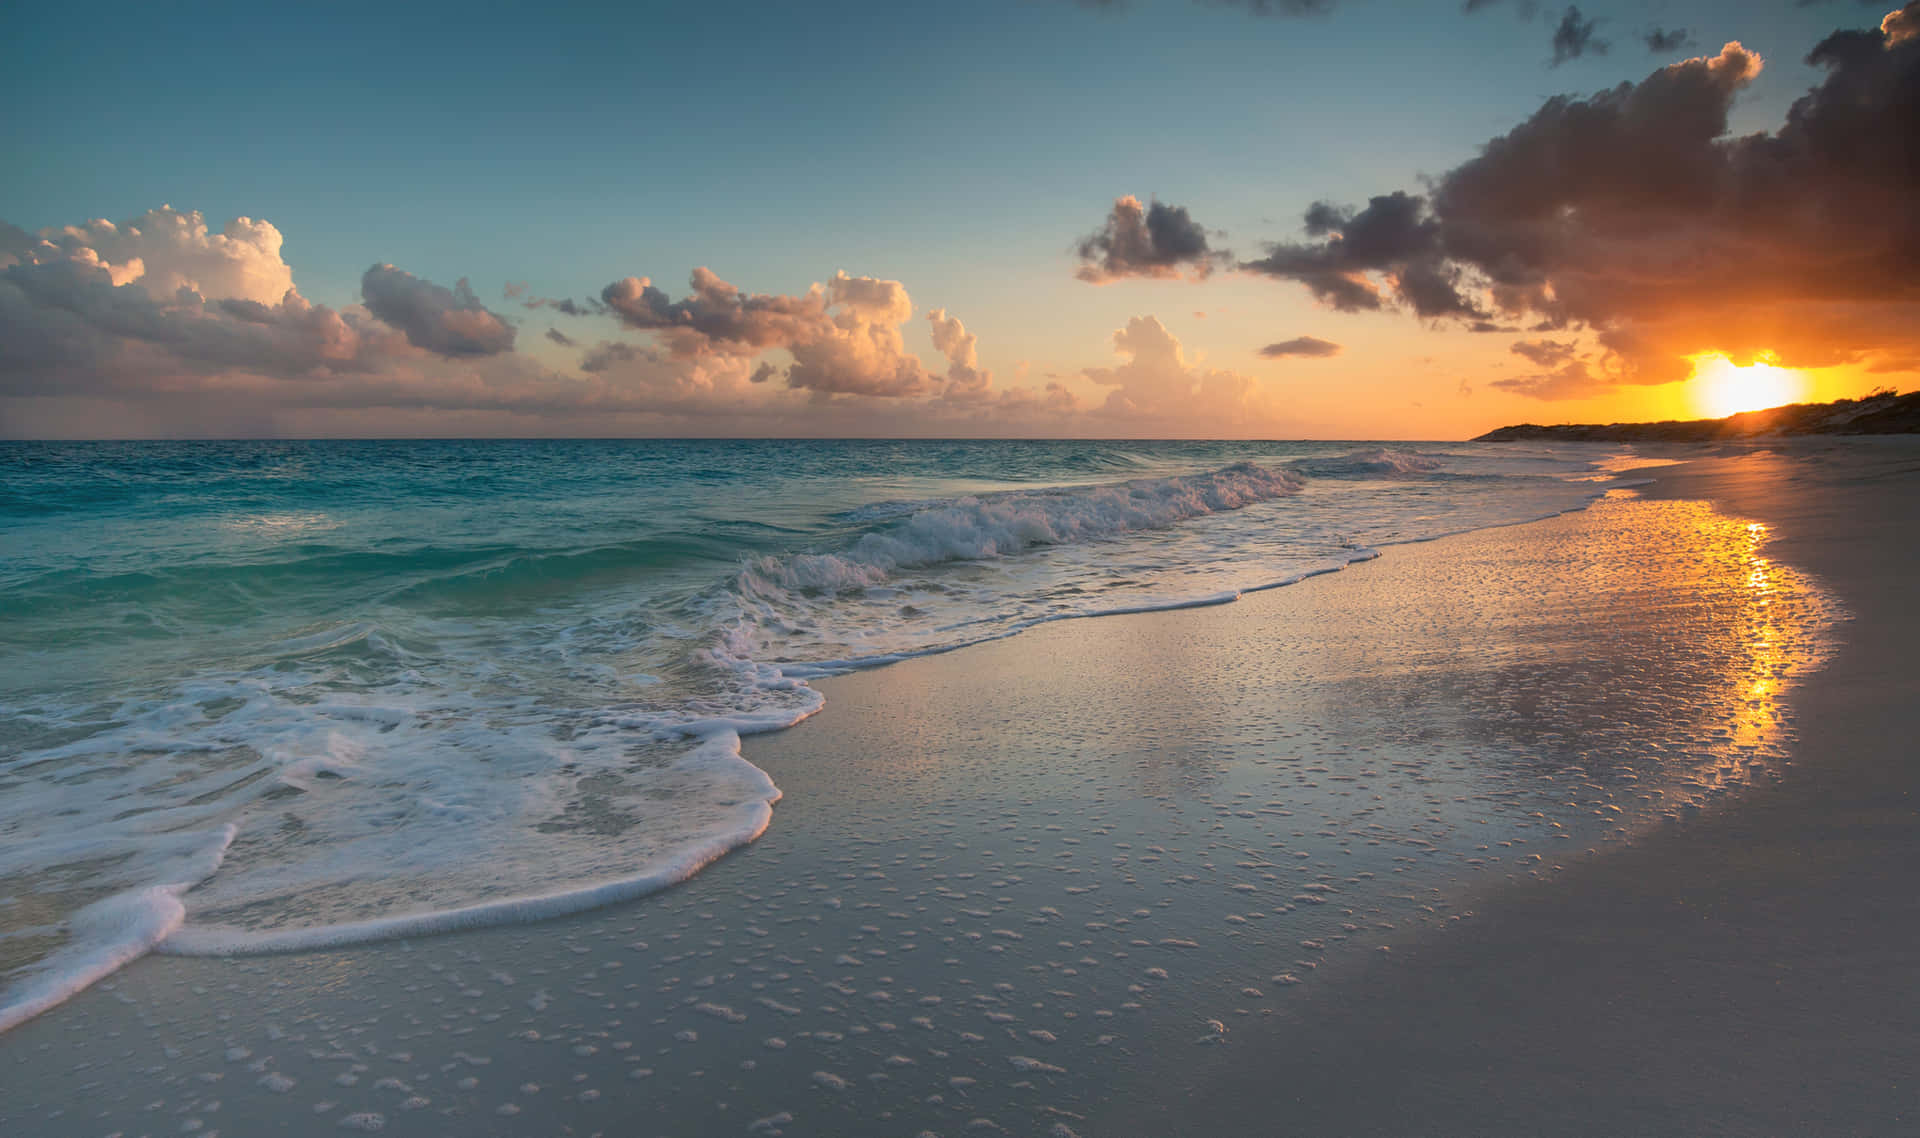 Watch the sky light up in a beautiful sunrise with the backdrop of a calm beach.